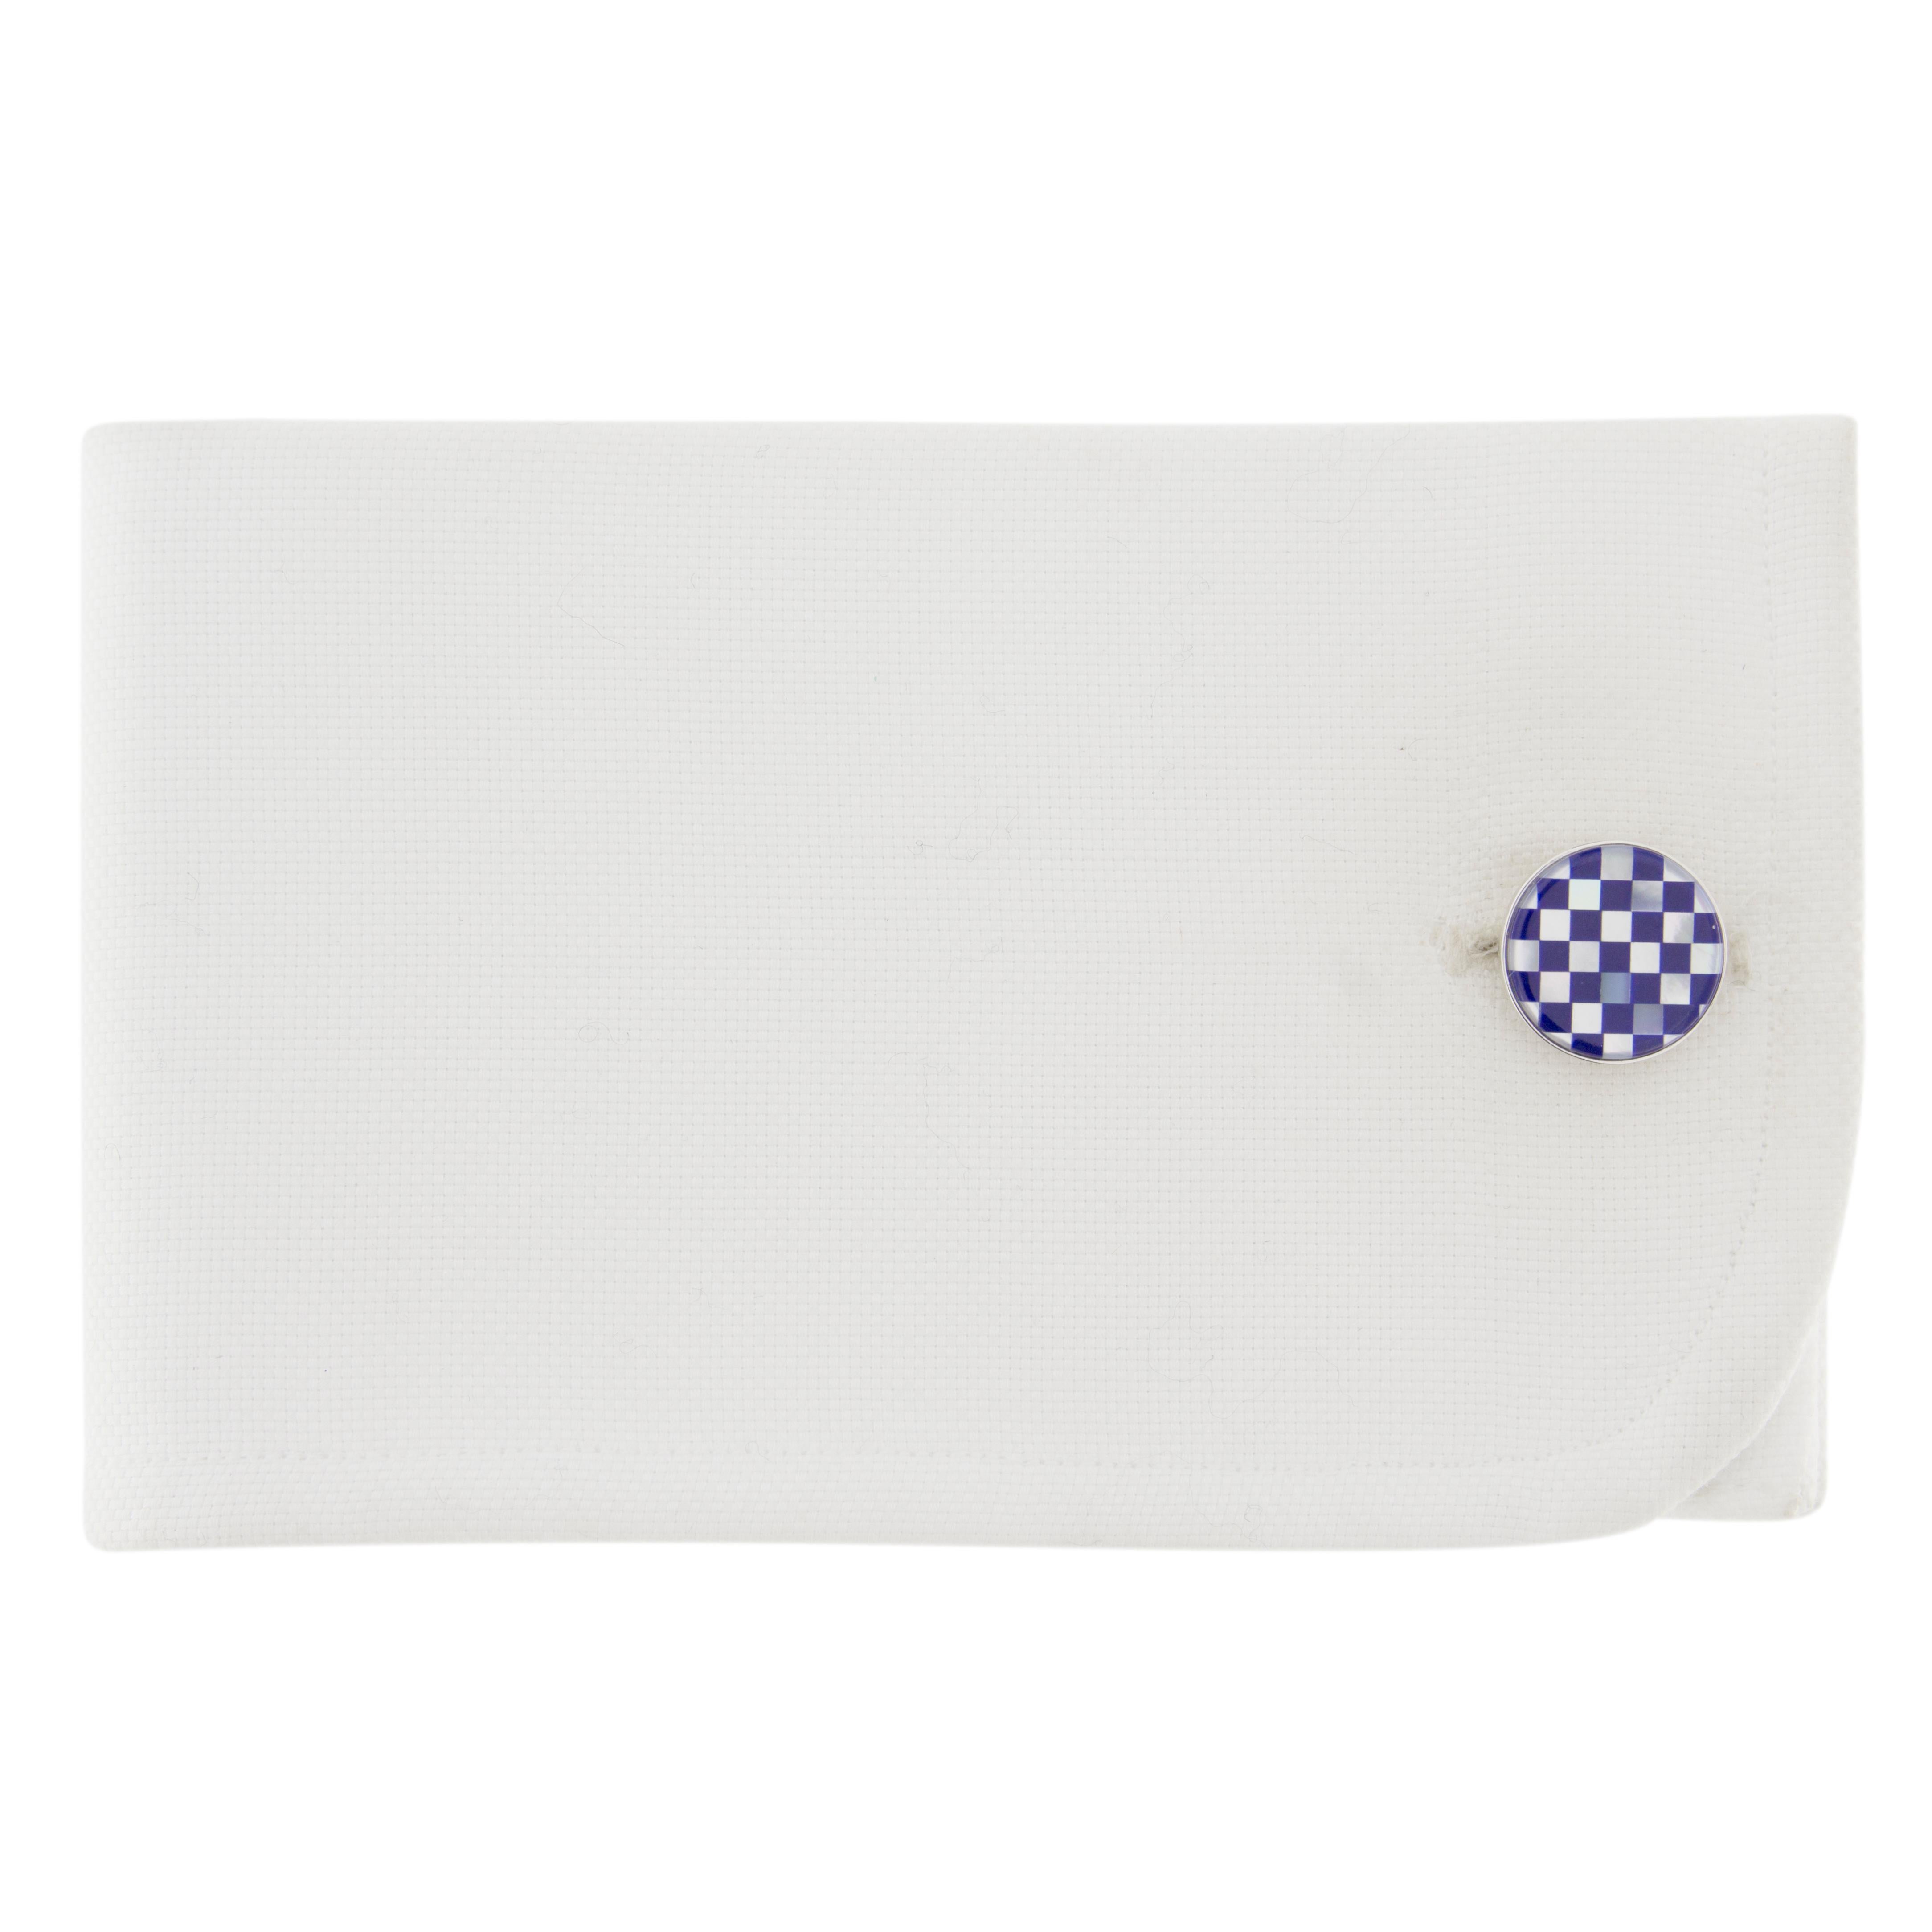 Jona design collection, hand crafted in Italy, rhodium plated sterling silver Lapis Lazuli and Mother of Pearl cufflinks. Marked Jona 925.
Dimensions:
Diameter 0.58 in / 14.90 mm X Depth 0.12 in / 3.20 mm
All Jona jewelry is new and has never been